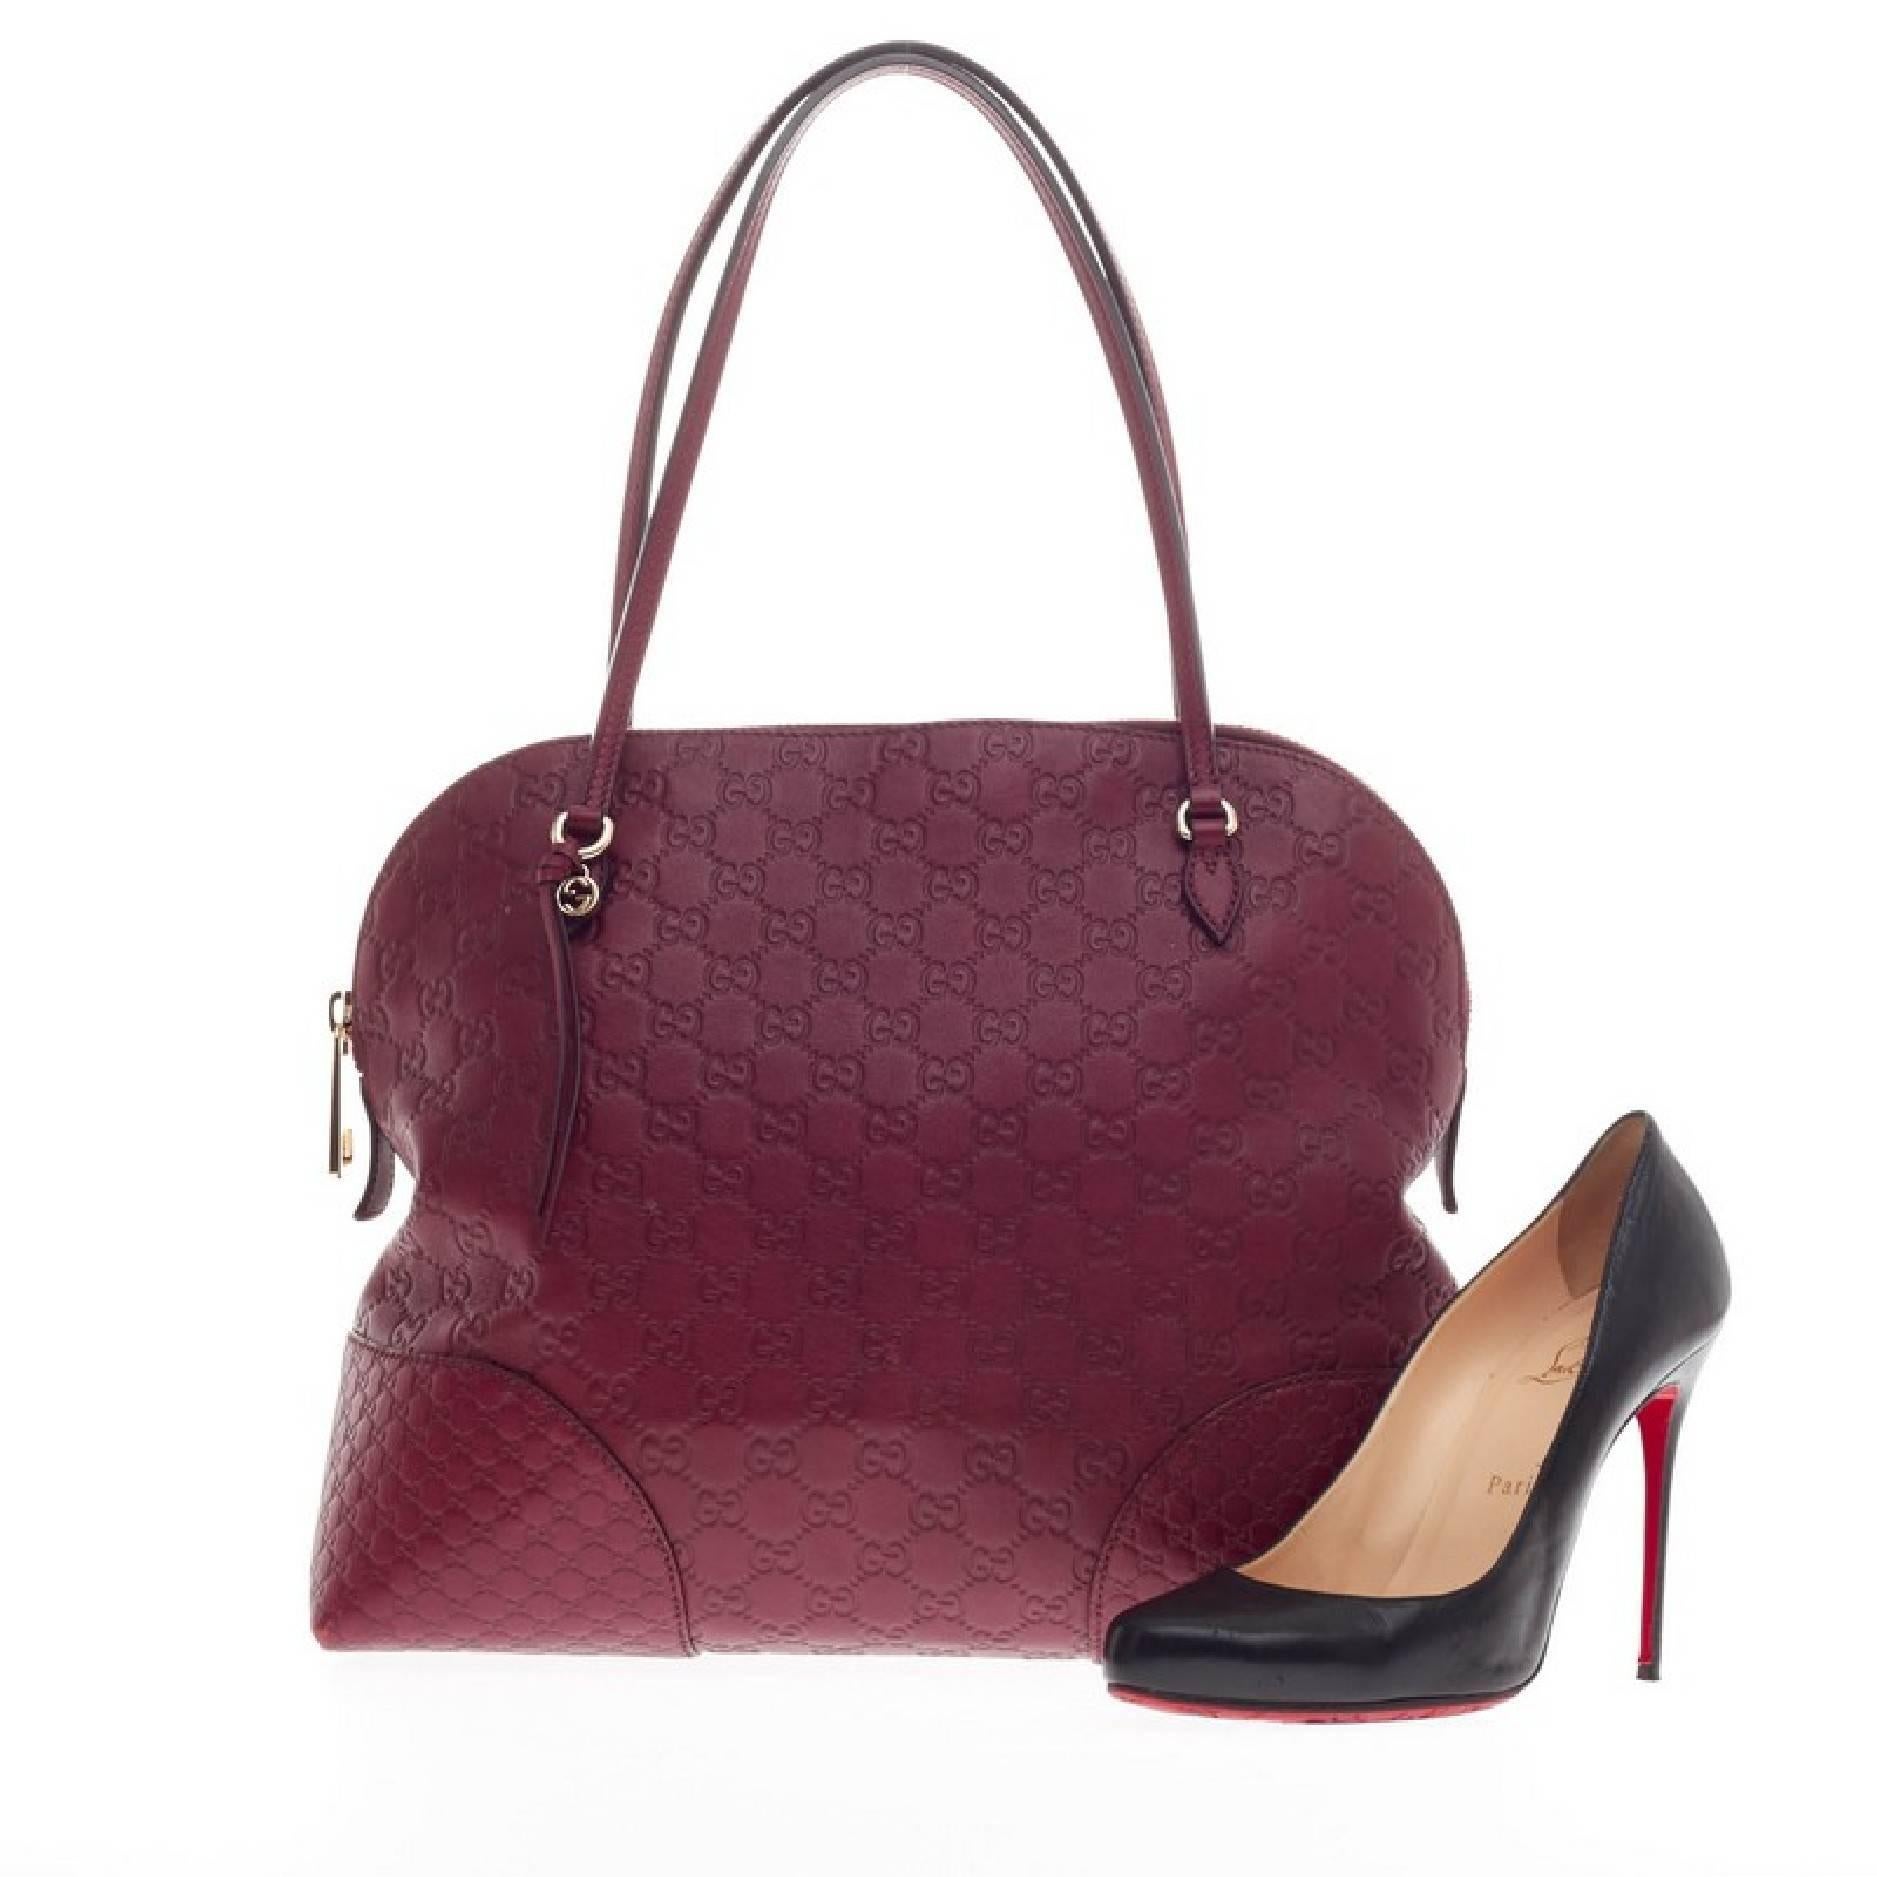 This authentic Gucci Bree Dome Tote Guccissima Leather Medium is perfect for everyday casual look. Crafted in ruby red guccissima leather with microguccissima leather detailing, this dome-style tote features tall slim handles, small Gucci GG charm